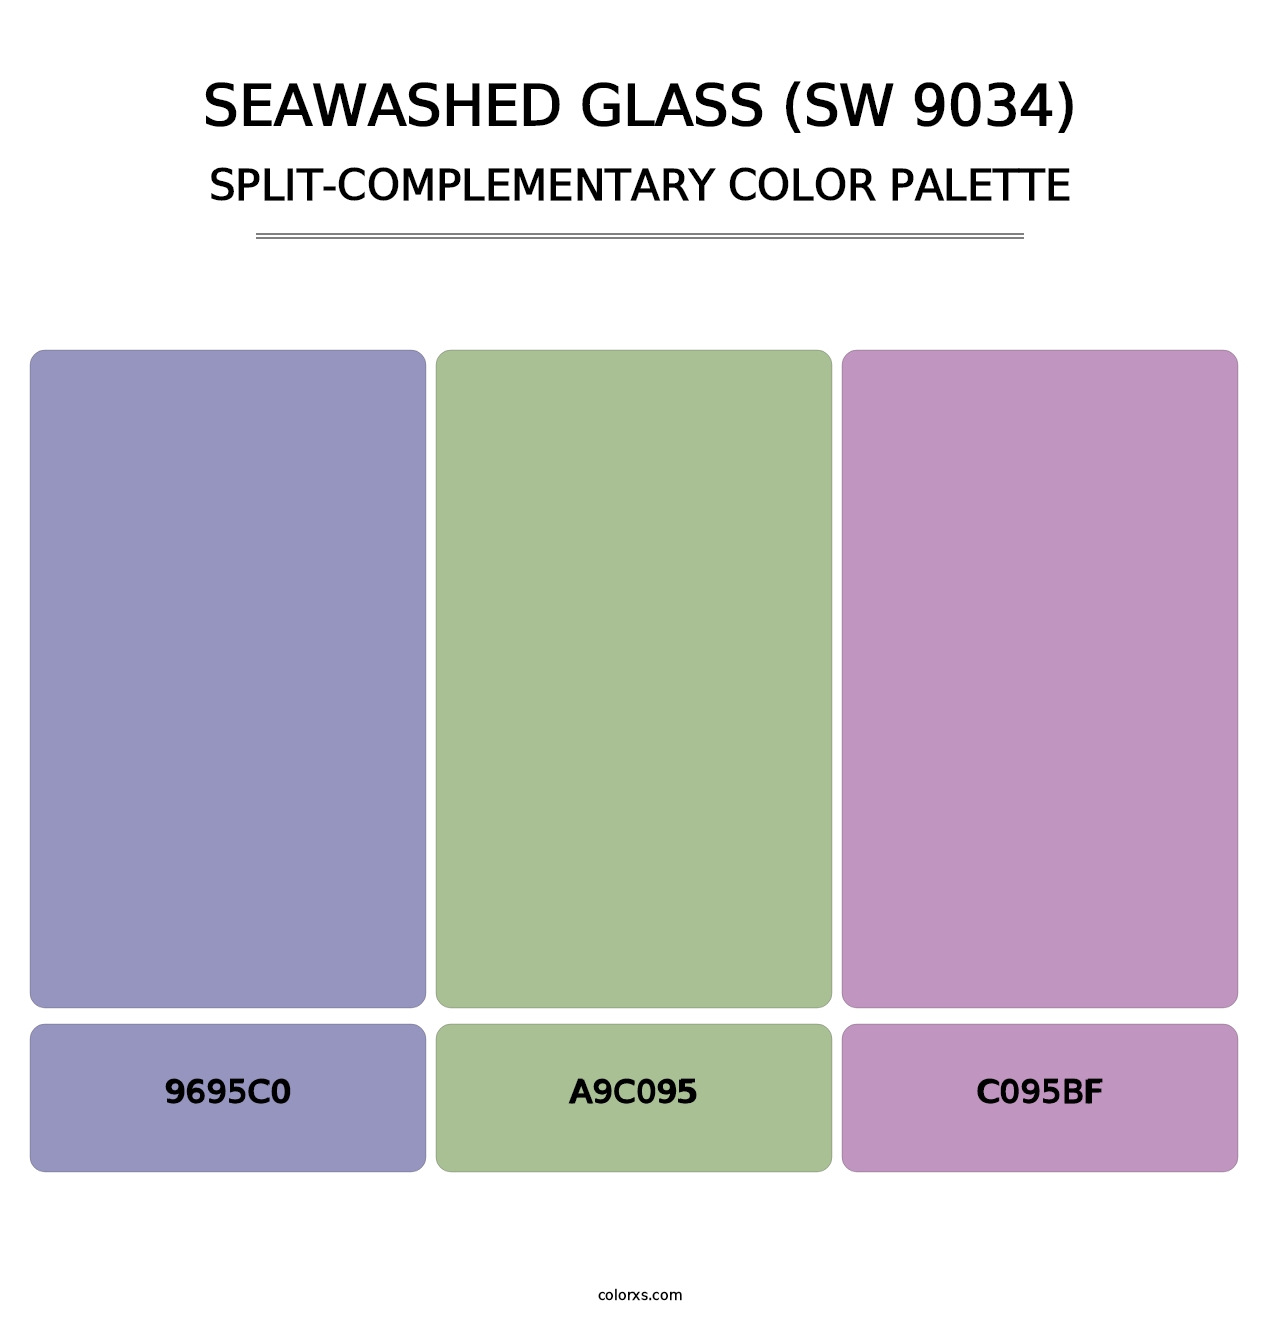 Seawashed Glass (SW 9034) - Split-Complementary Color Palette